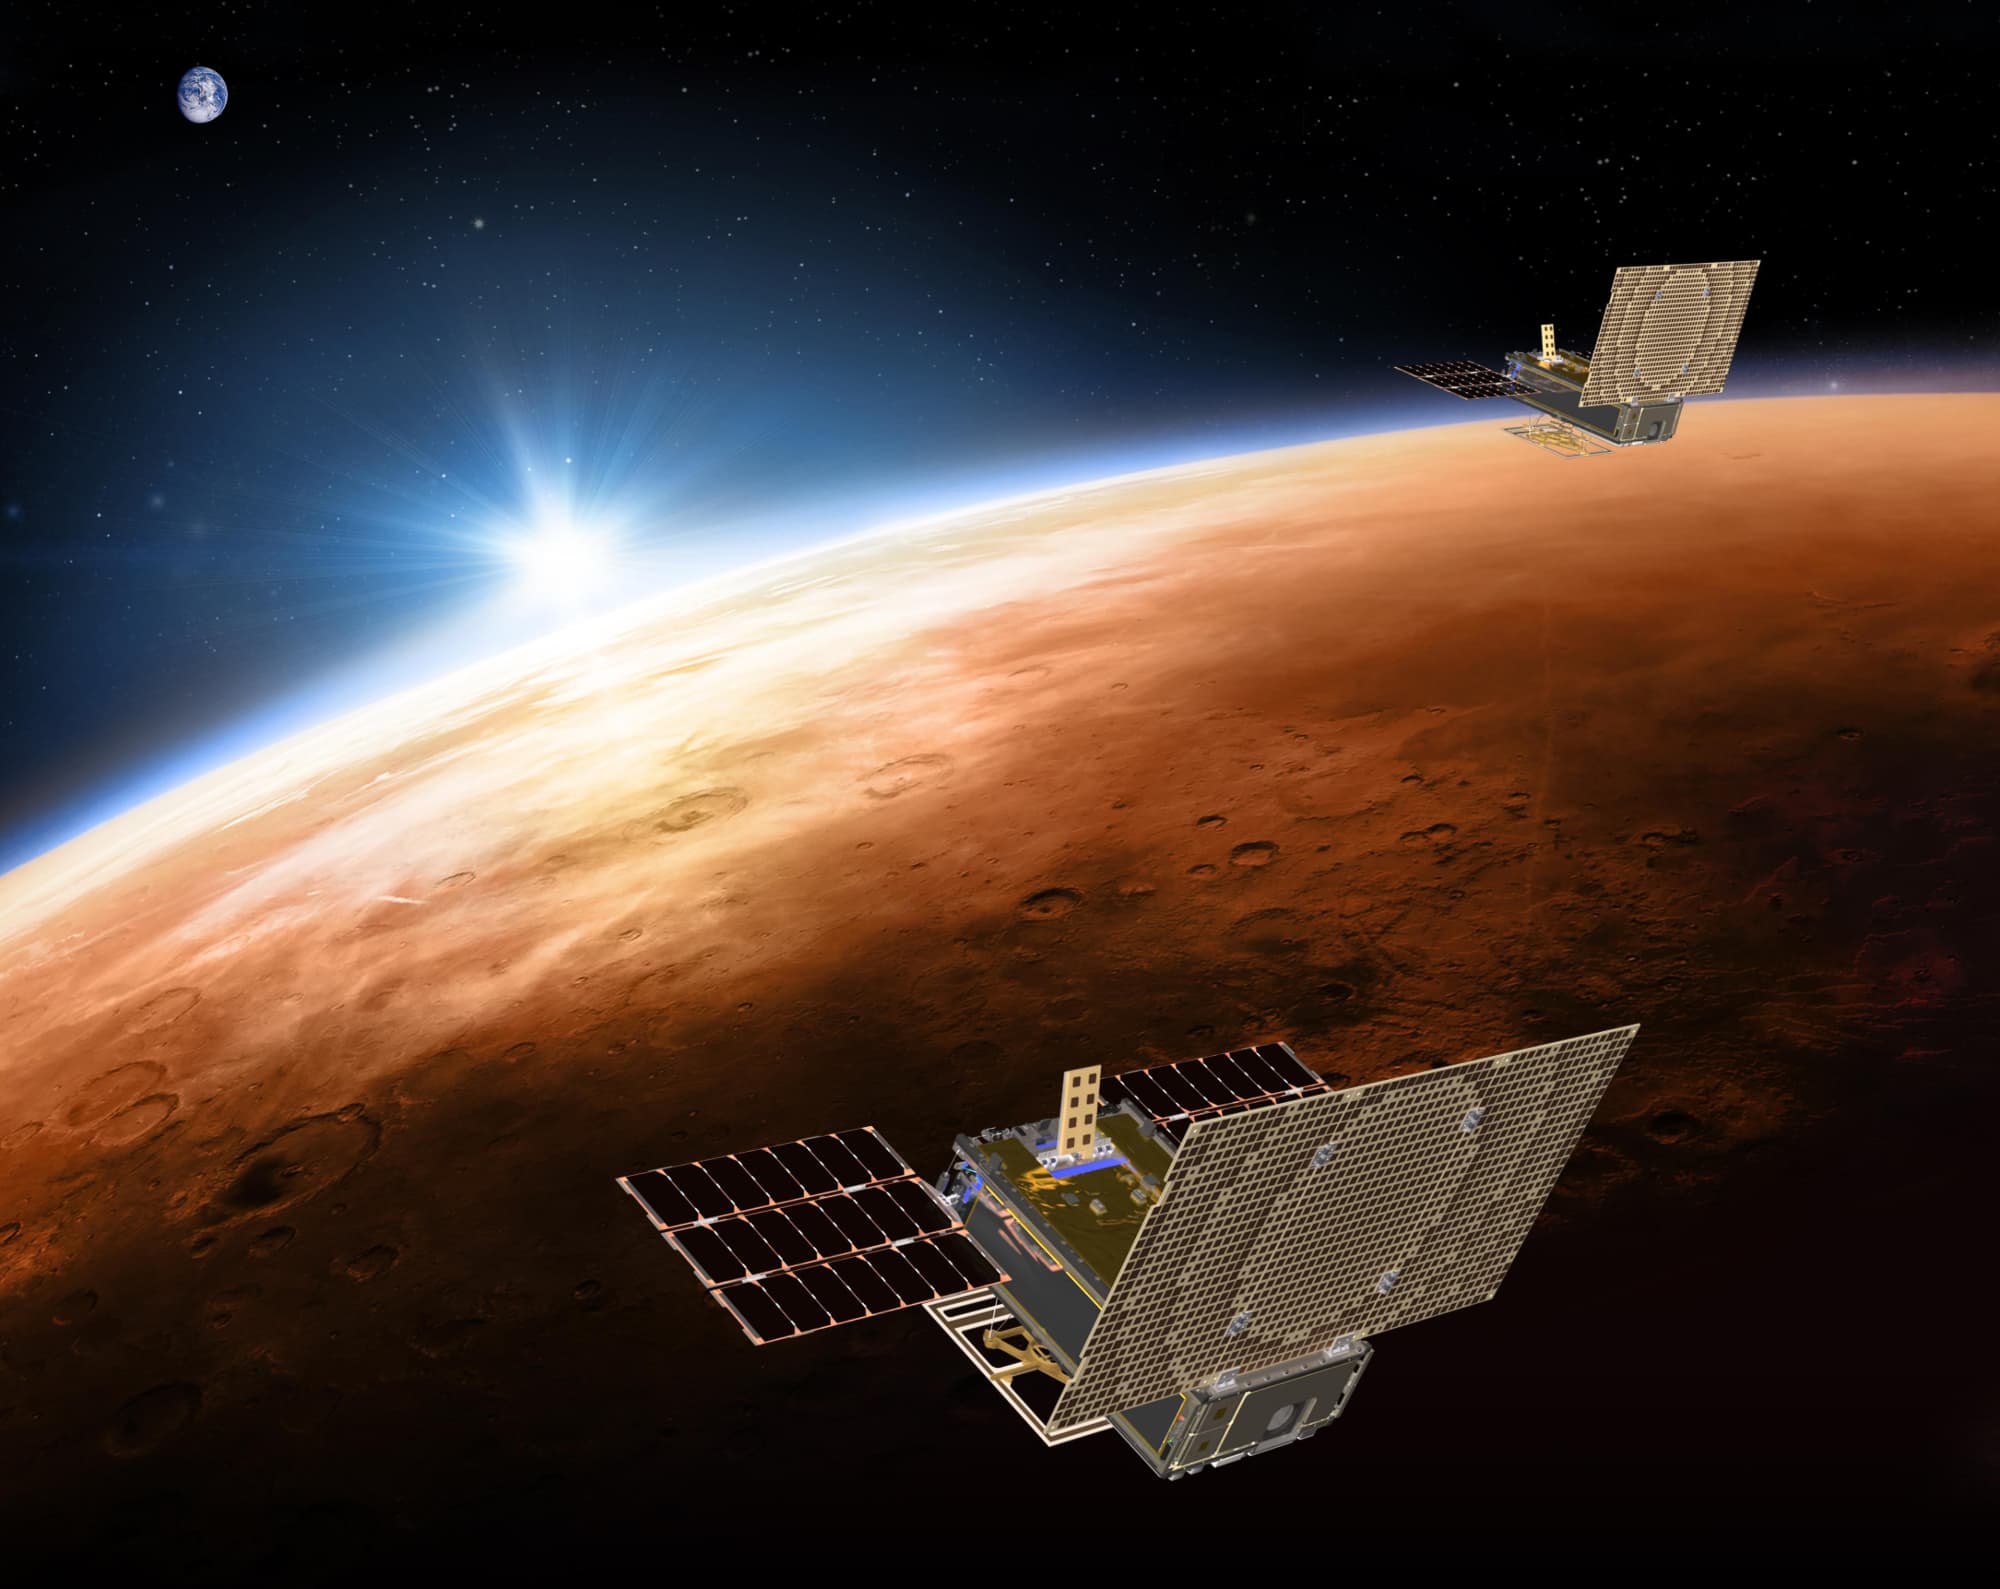 56: Mars Cube One, the first interplanetary CubeSats with Joel Steinkraus